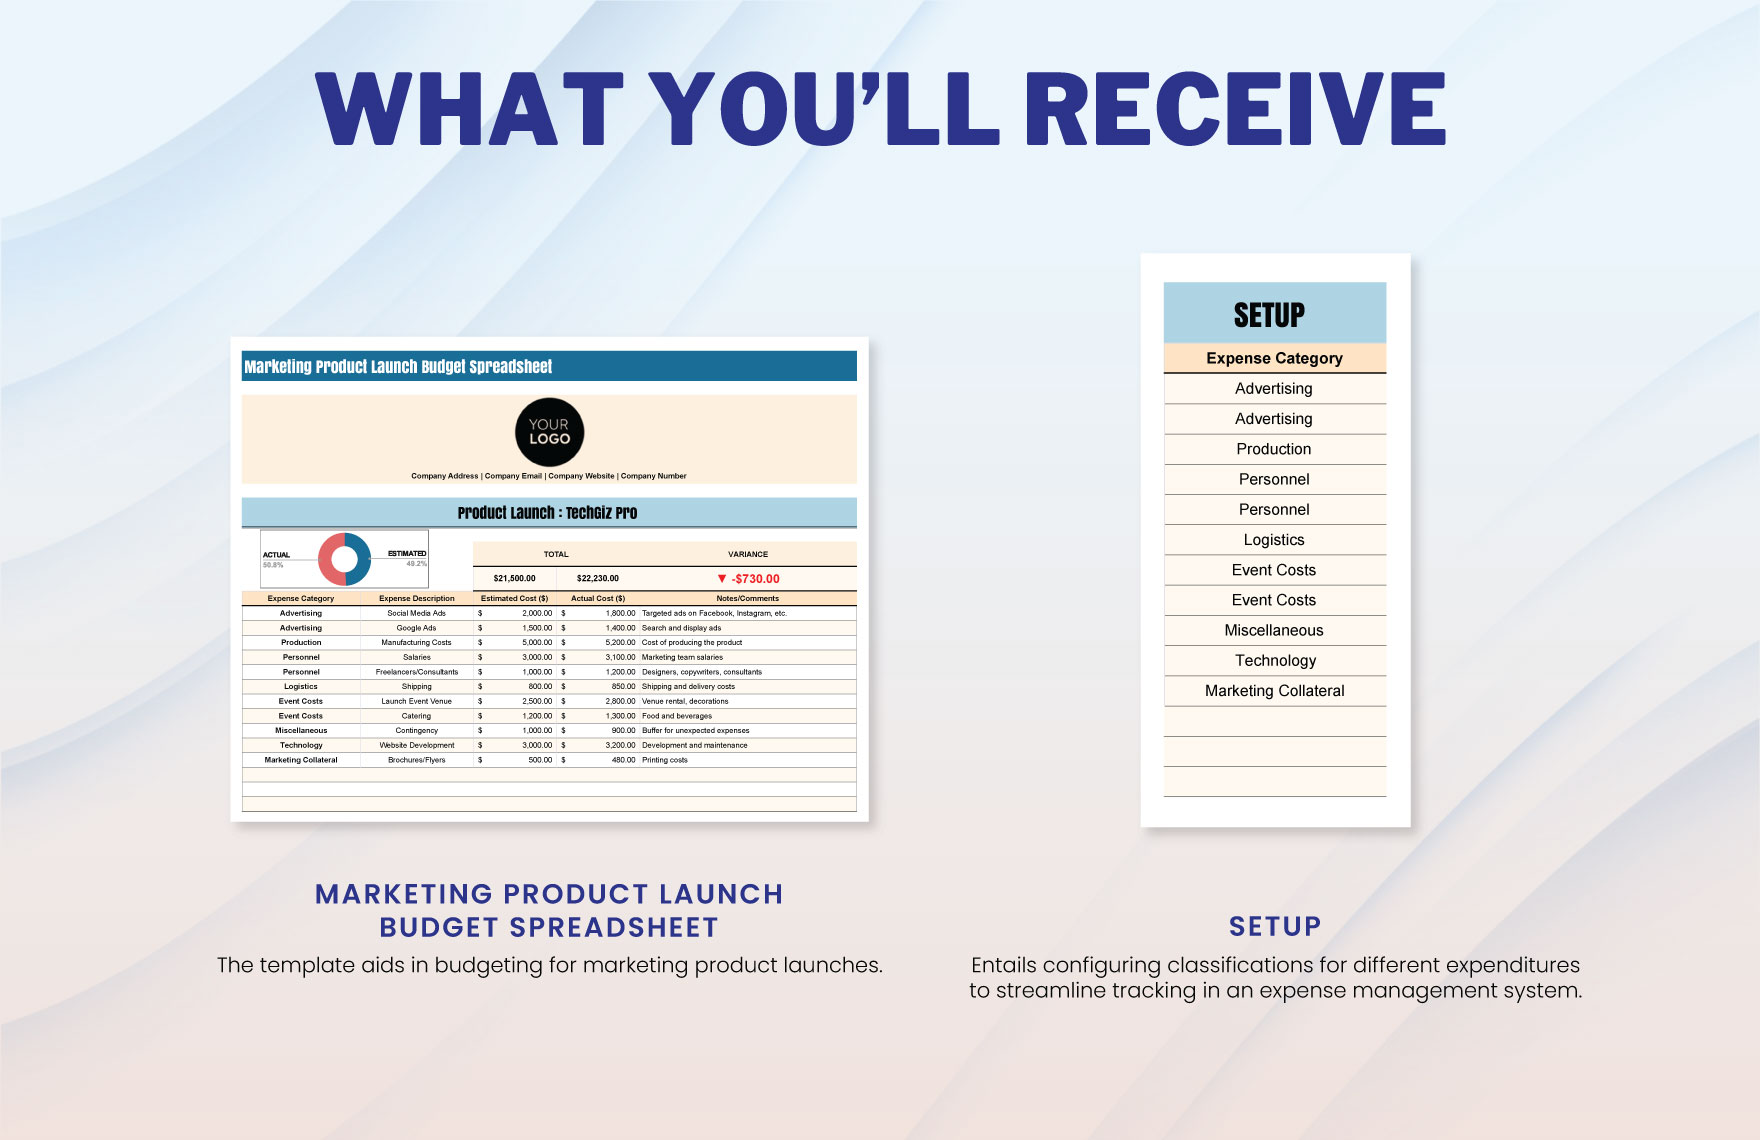 Marketing Product Launch Budget Spreadsheet Template in MS Excel